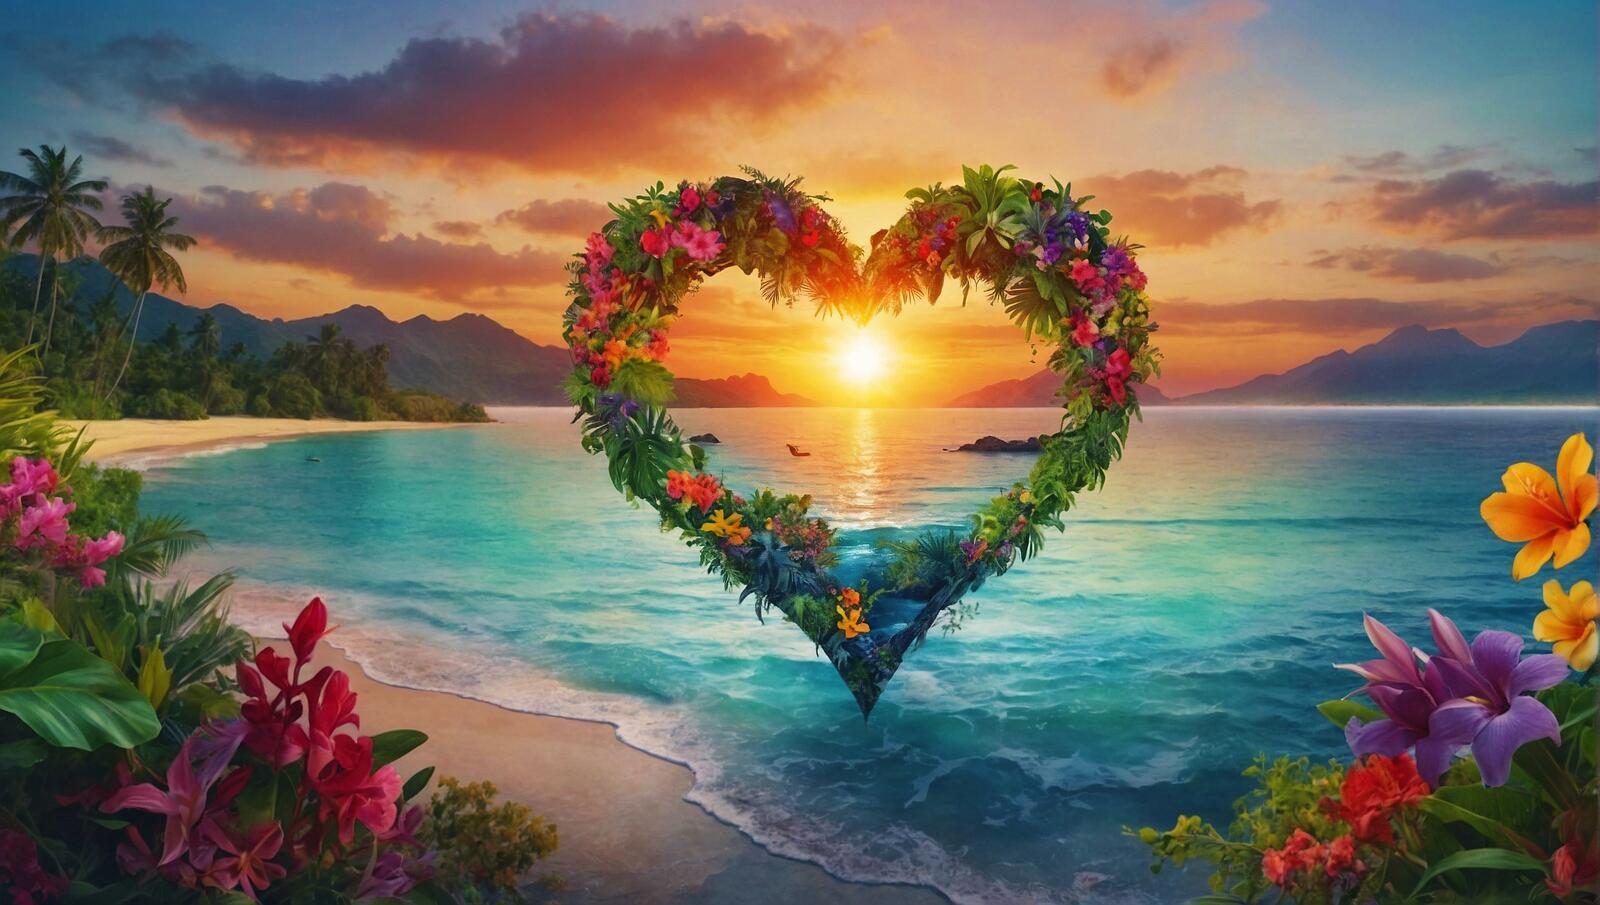 Free photo A painting with a heart shaped floral arrangement over water